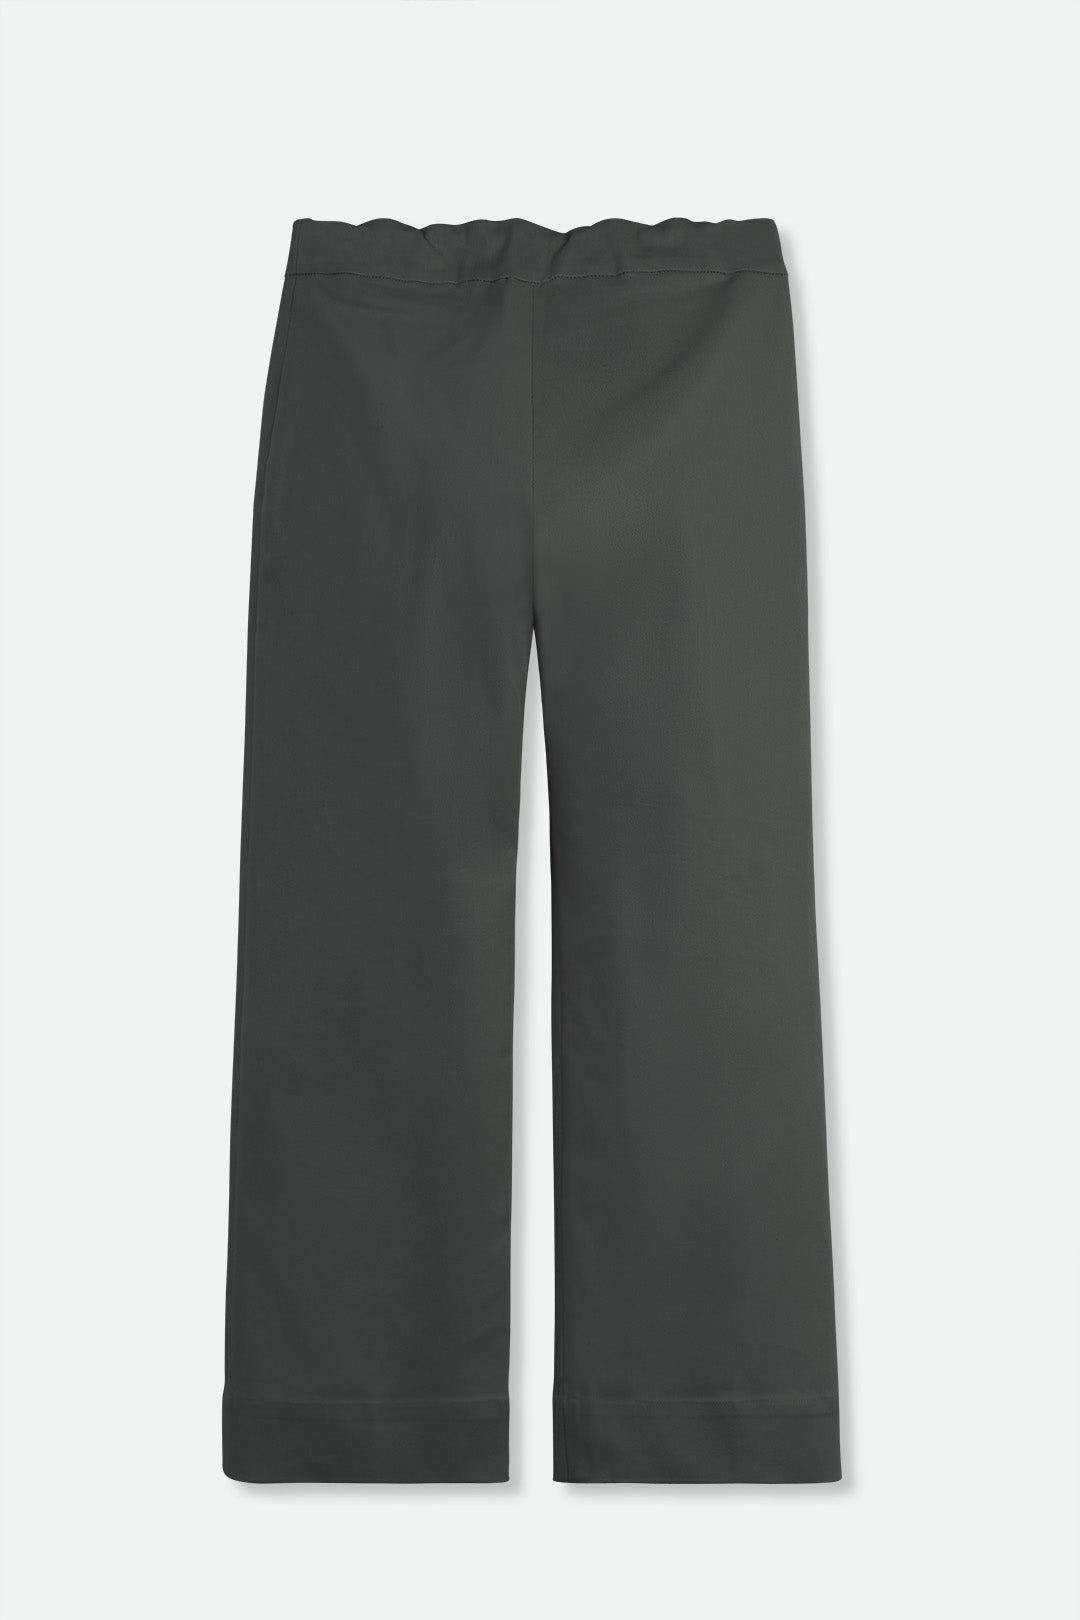 Terni Fitted Waist Crop Pant in Technical Cotton Stretch - Jarbo